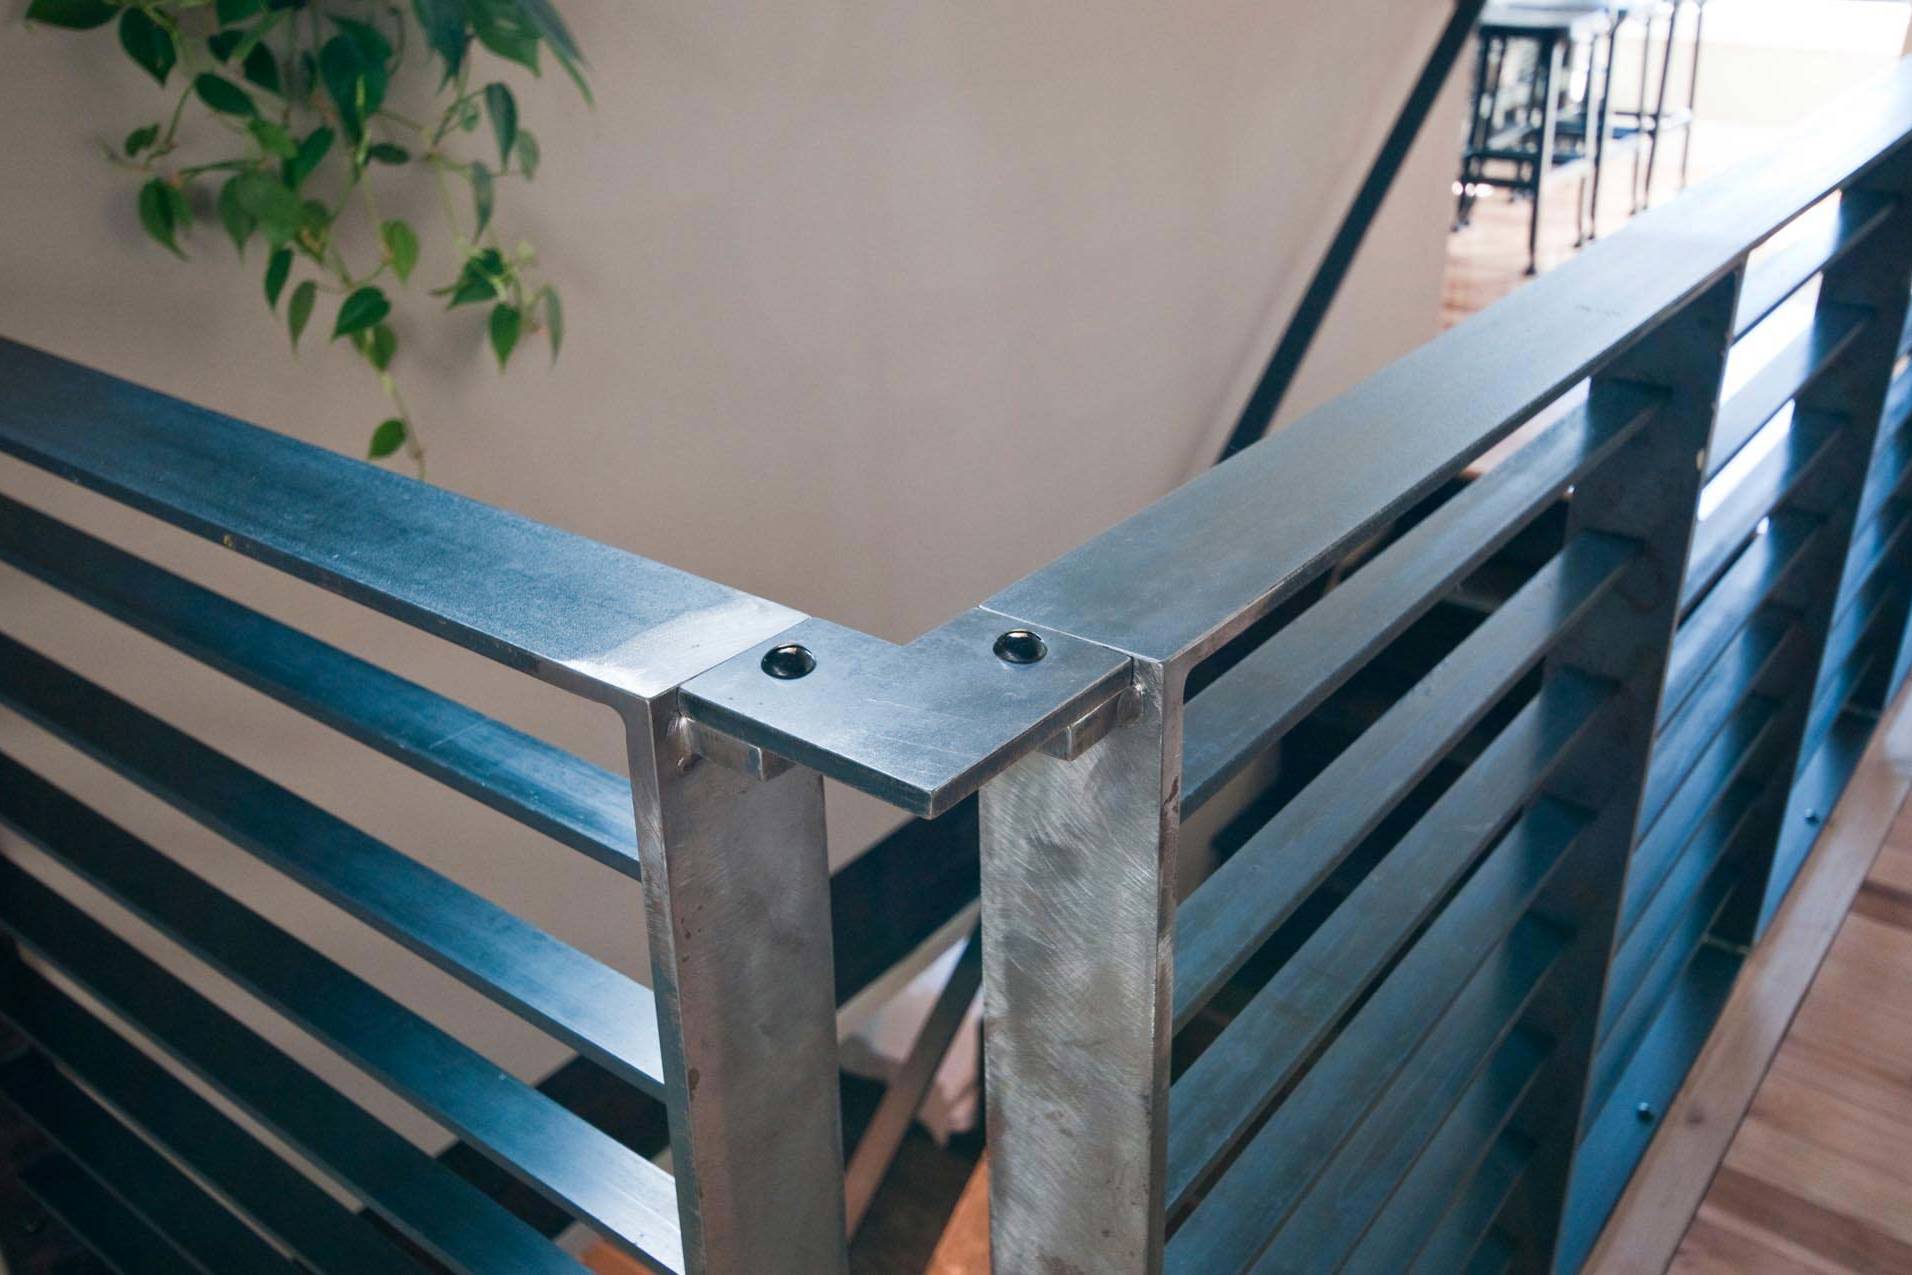 Steel Guard and Handrail designed and built by rhiza A+D